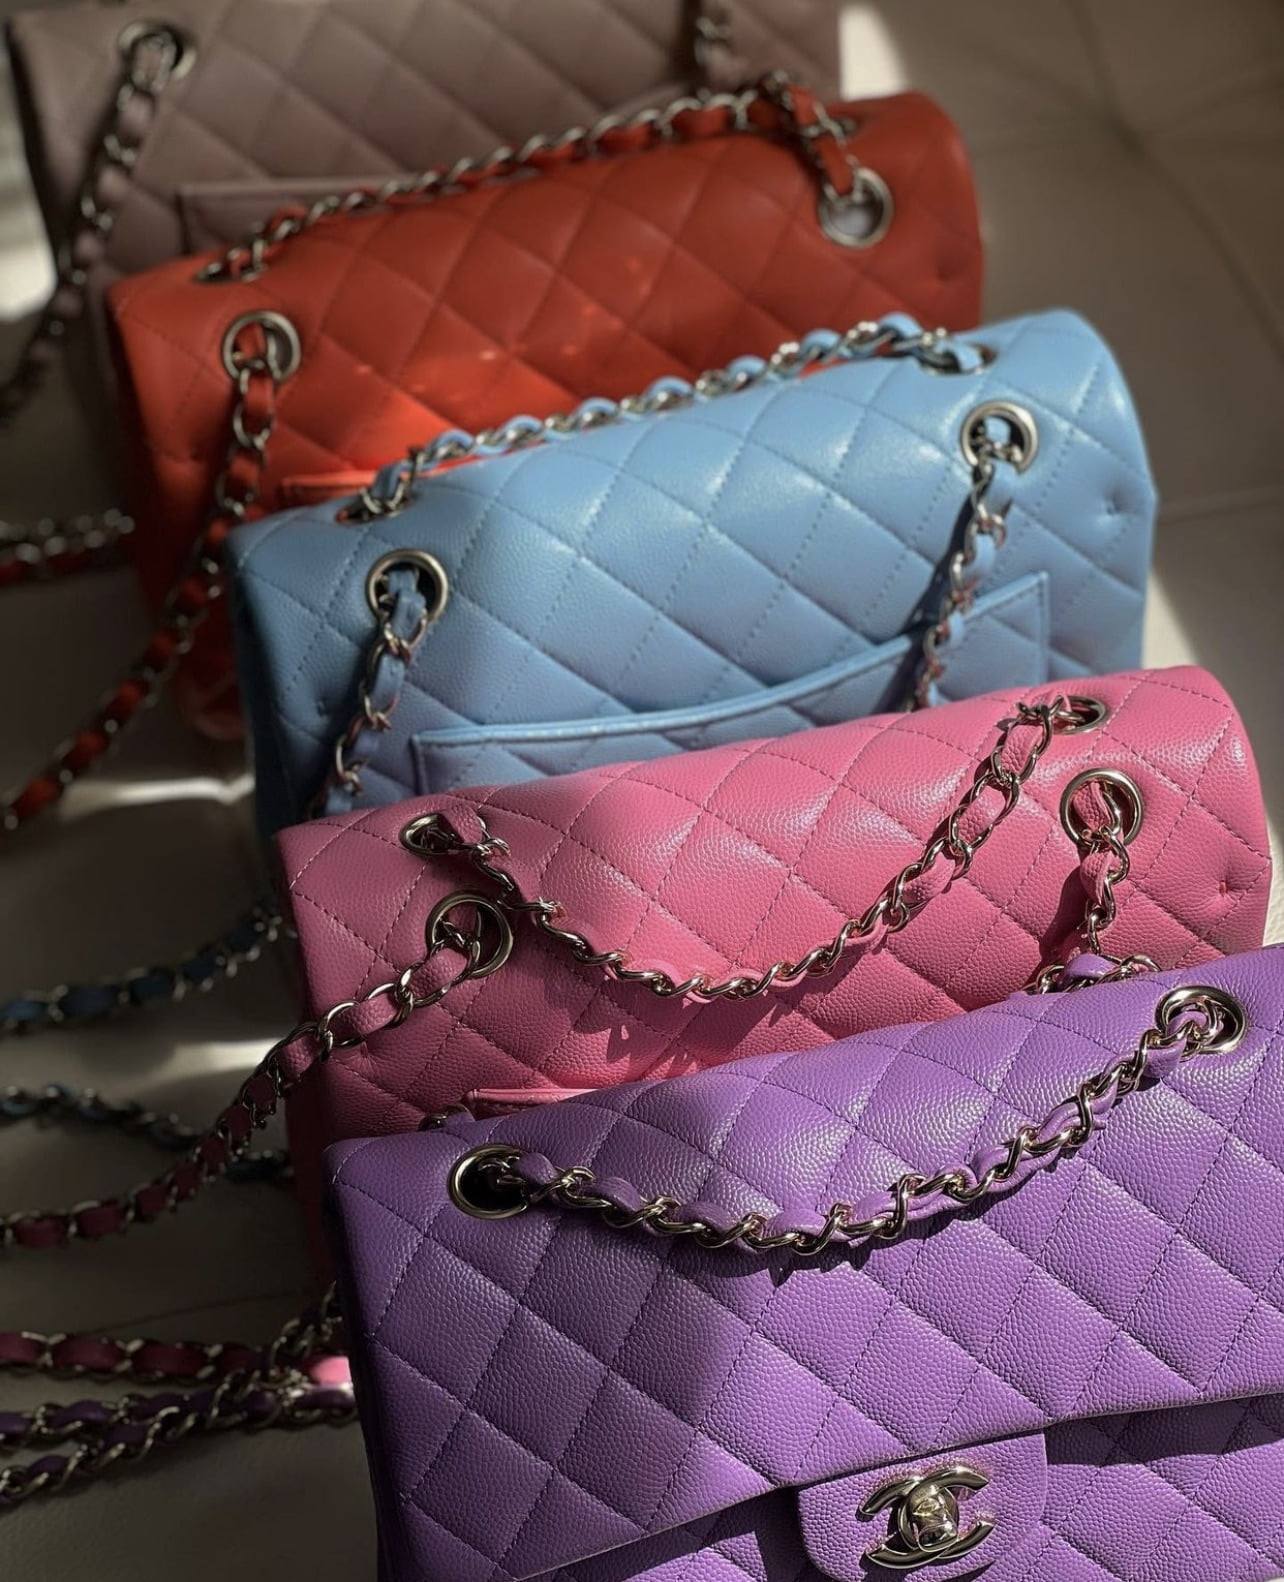 FIVE reasons you SHOULDN'T buy the Chanel classic flap bag